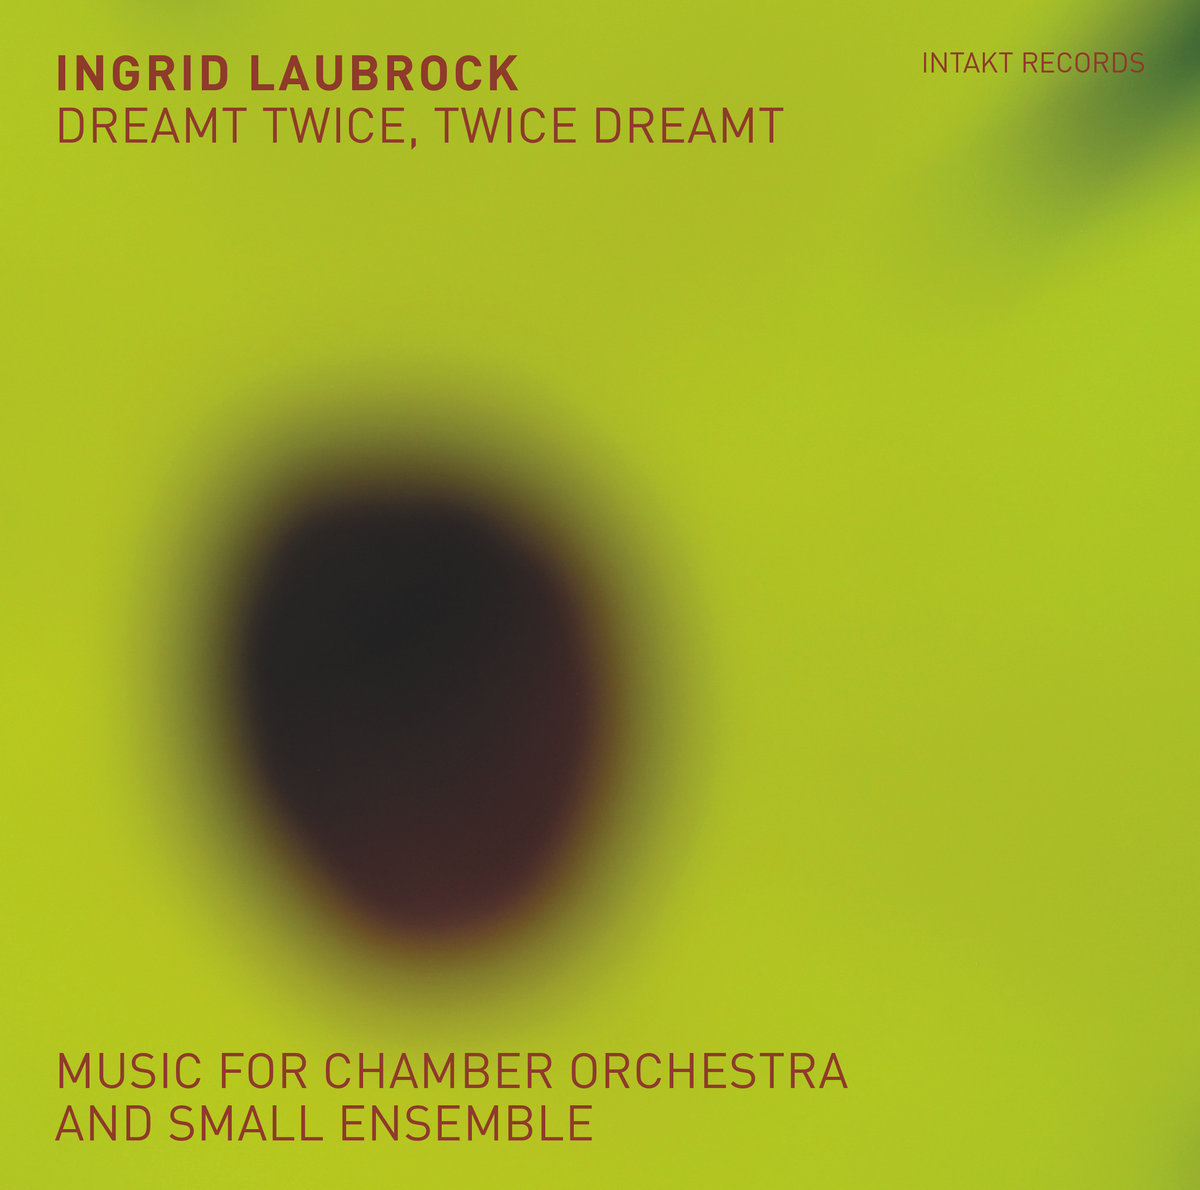 Ingrid Laubrock - Dreamt Twice, Twice Dreamt: Music for Chamber Orchestra & Small Ensemble (2020) [FLAC 24bit/96kHz]